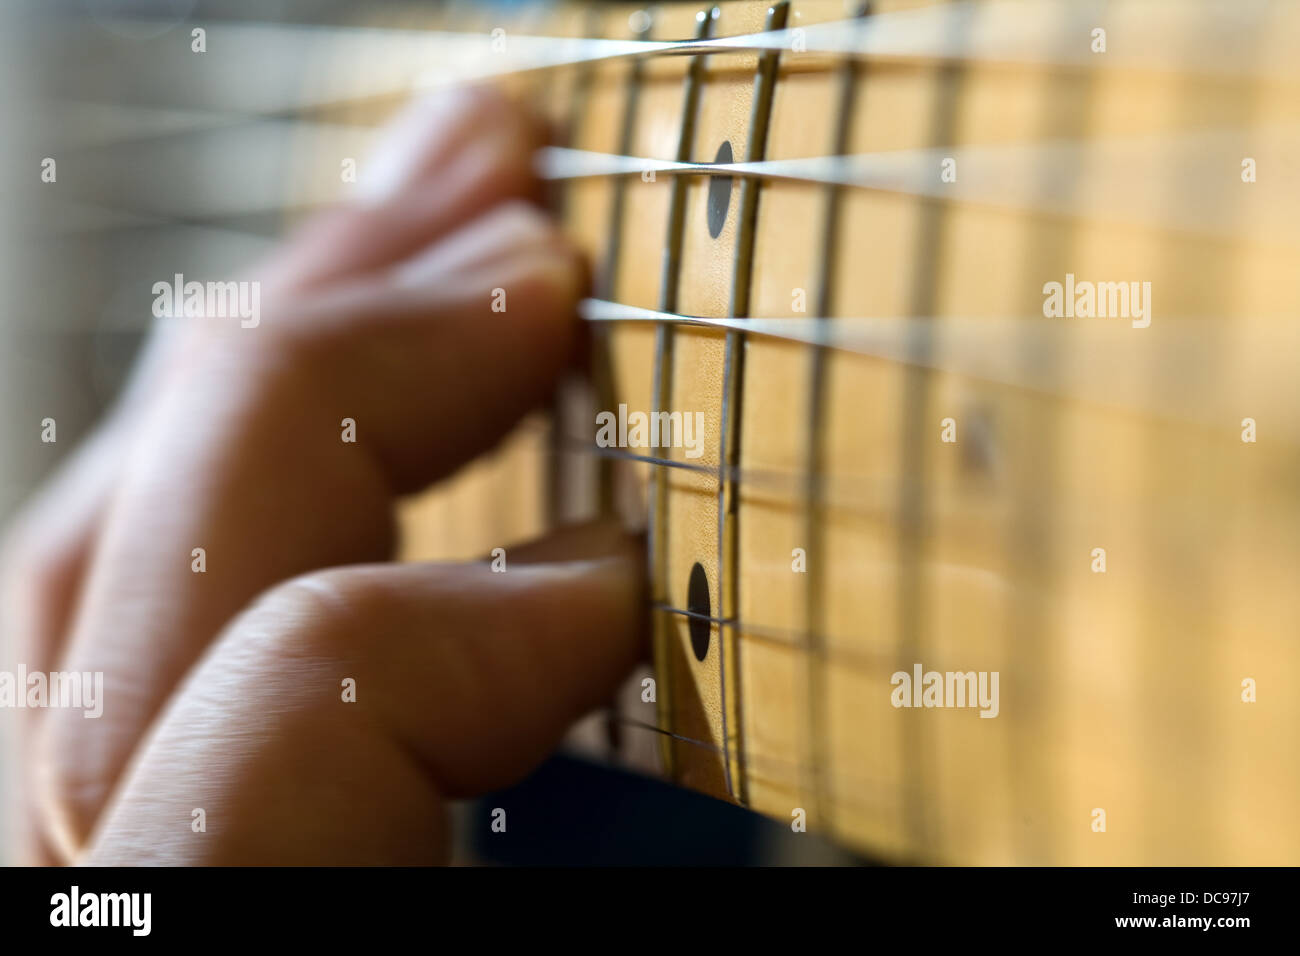 close-up of electric guitar fretboard with hand sliding a chord up the neck. Stock Photo